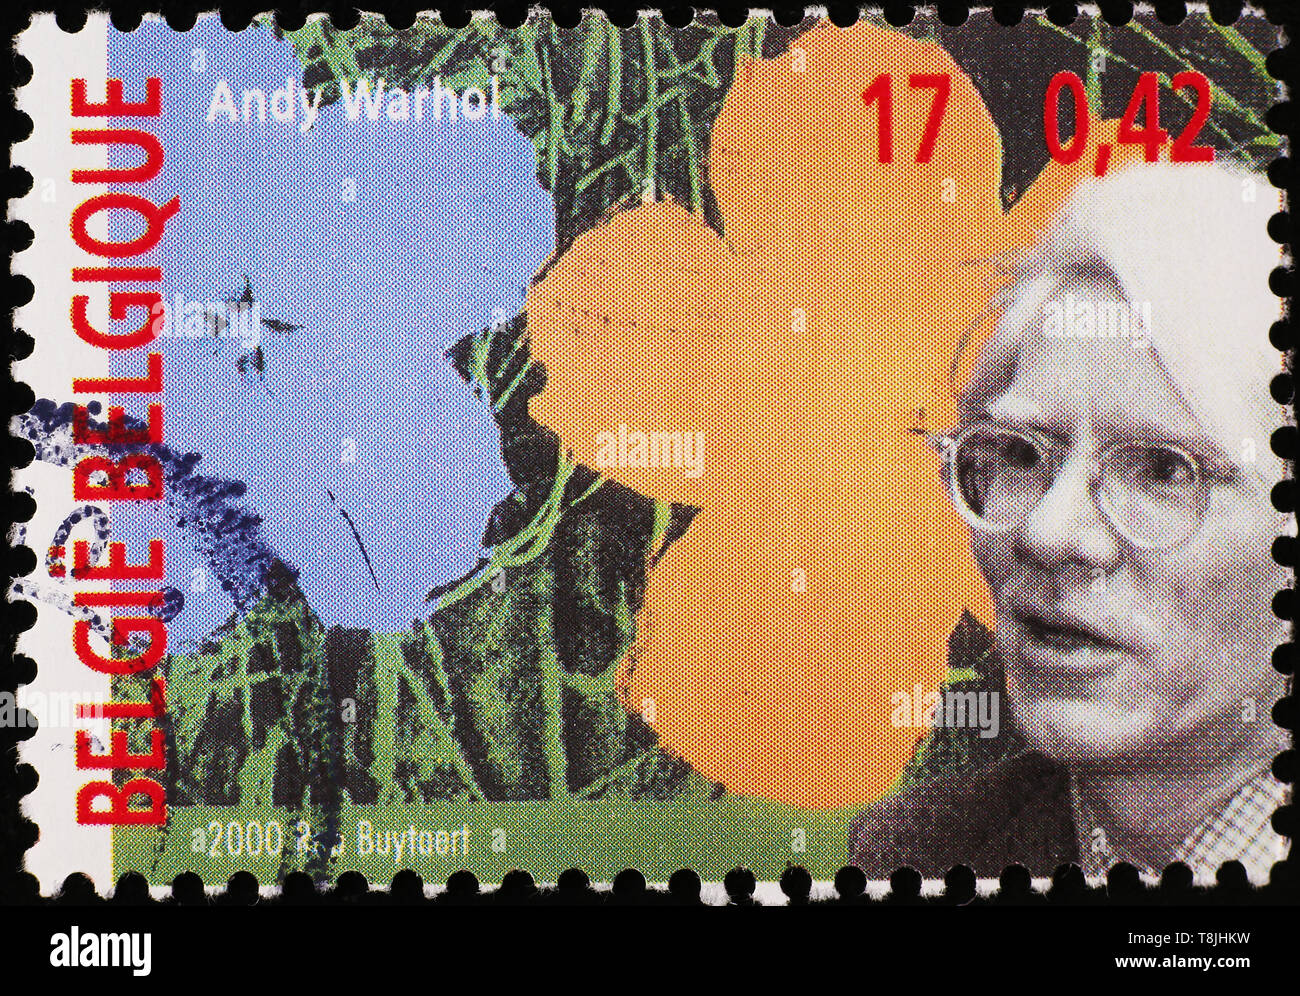 Portrait of Andy Warhol on postage stamp Stock Photo